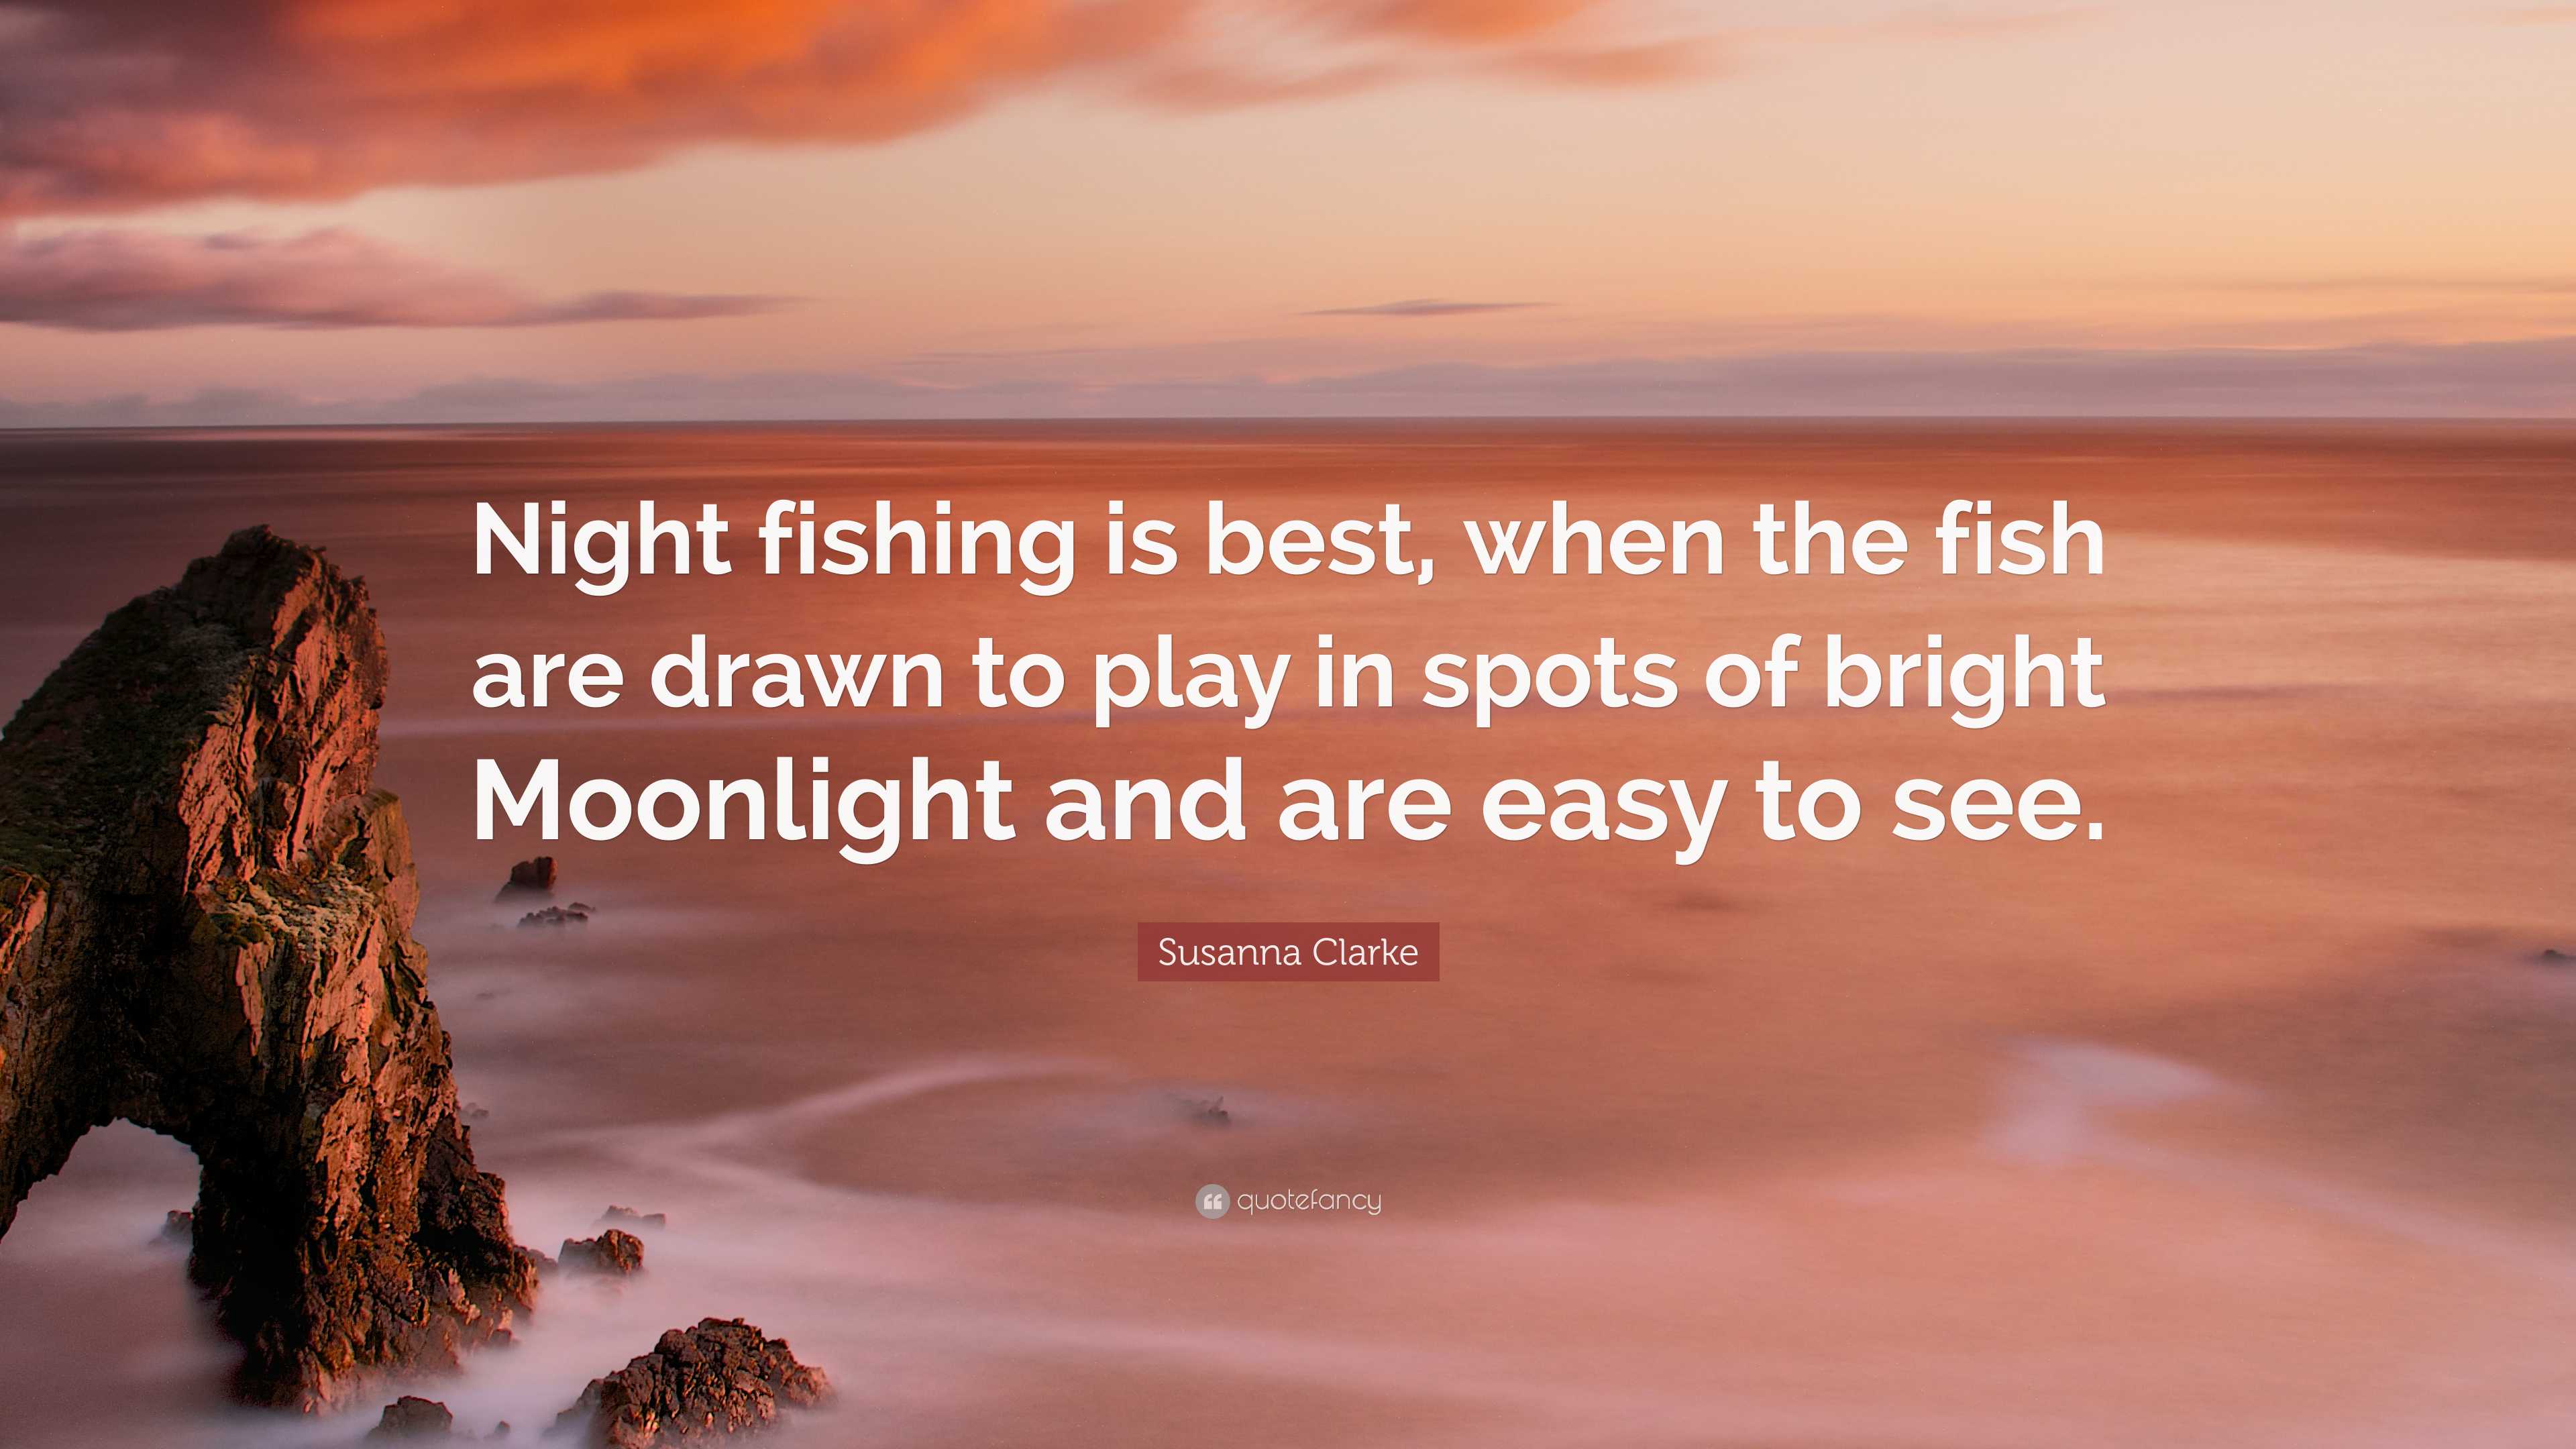 Susanna Clarke Quote: “Night fishing is best, when the fish are drawn to  play in spots